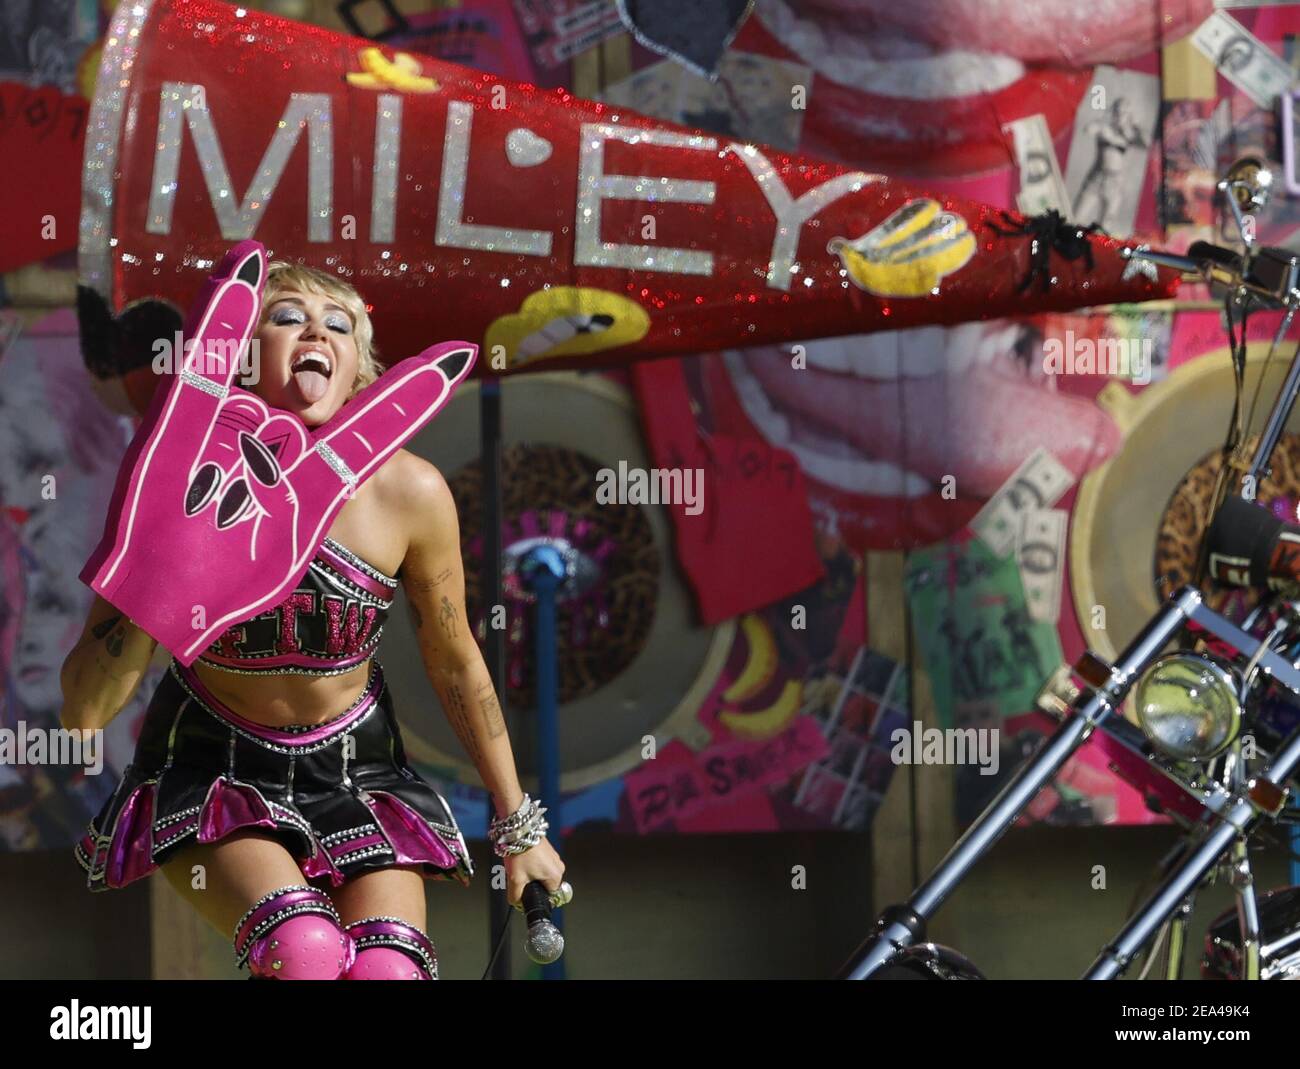 Tampa, United States. 07th Feb, 2021. Recording artist Mylie Cyrus performs during the Tic Tok Tailgate party prior to Super Bowl LV at Raymond James Stadium in Tampa, Fla. on Sunday, February 7, 2021. Photo by John Angelillo/UPI Credit: UPI/Alamy Live News Stock Photo